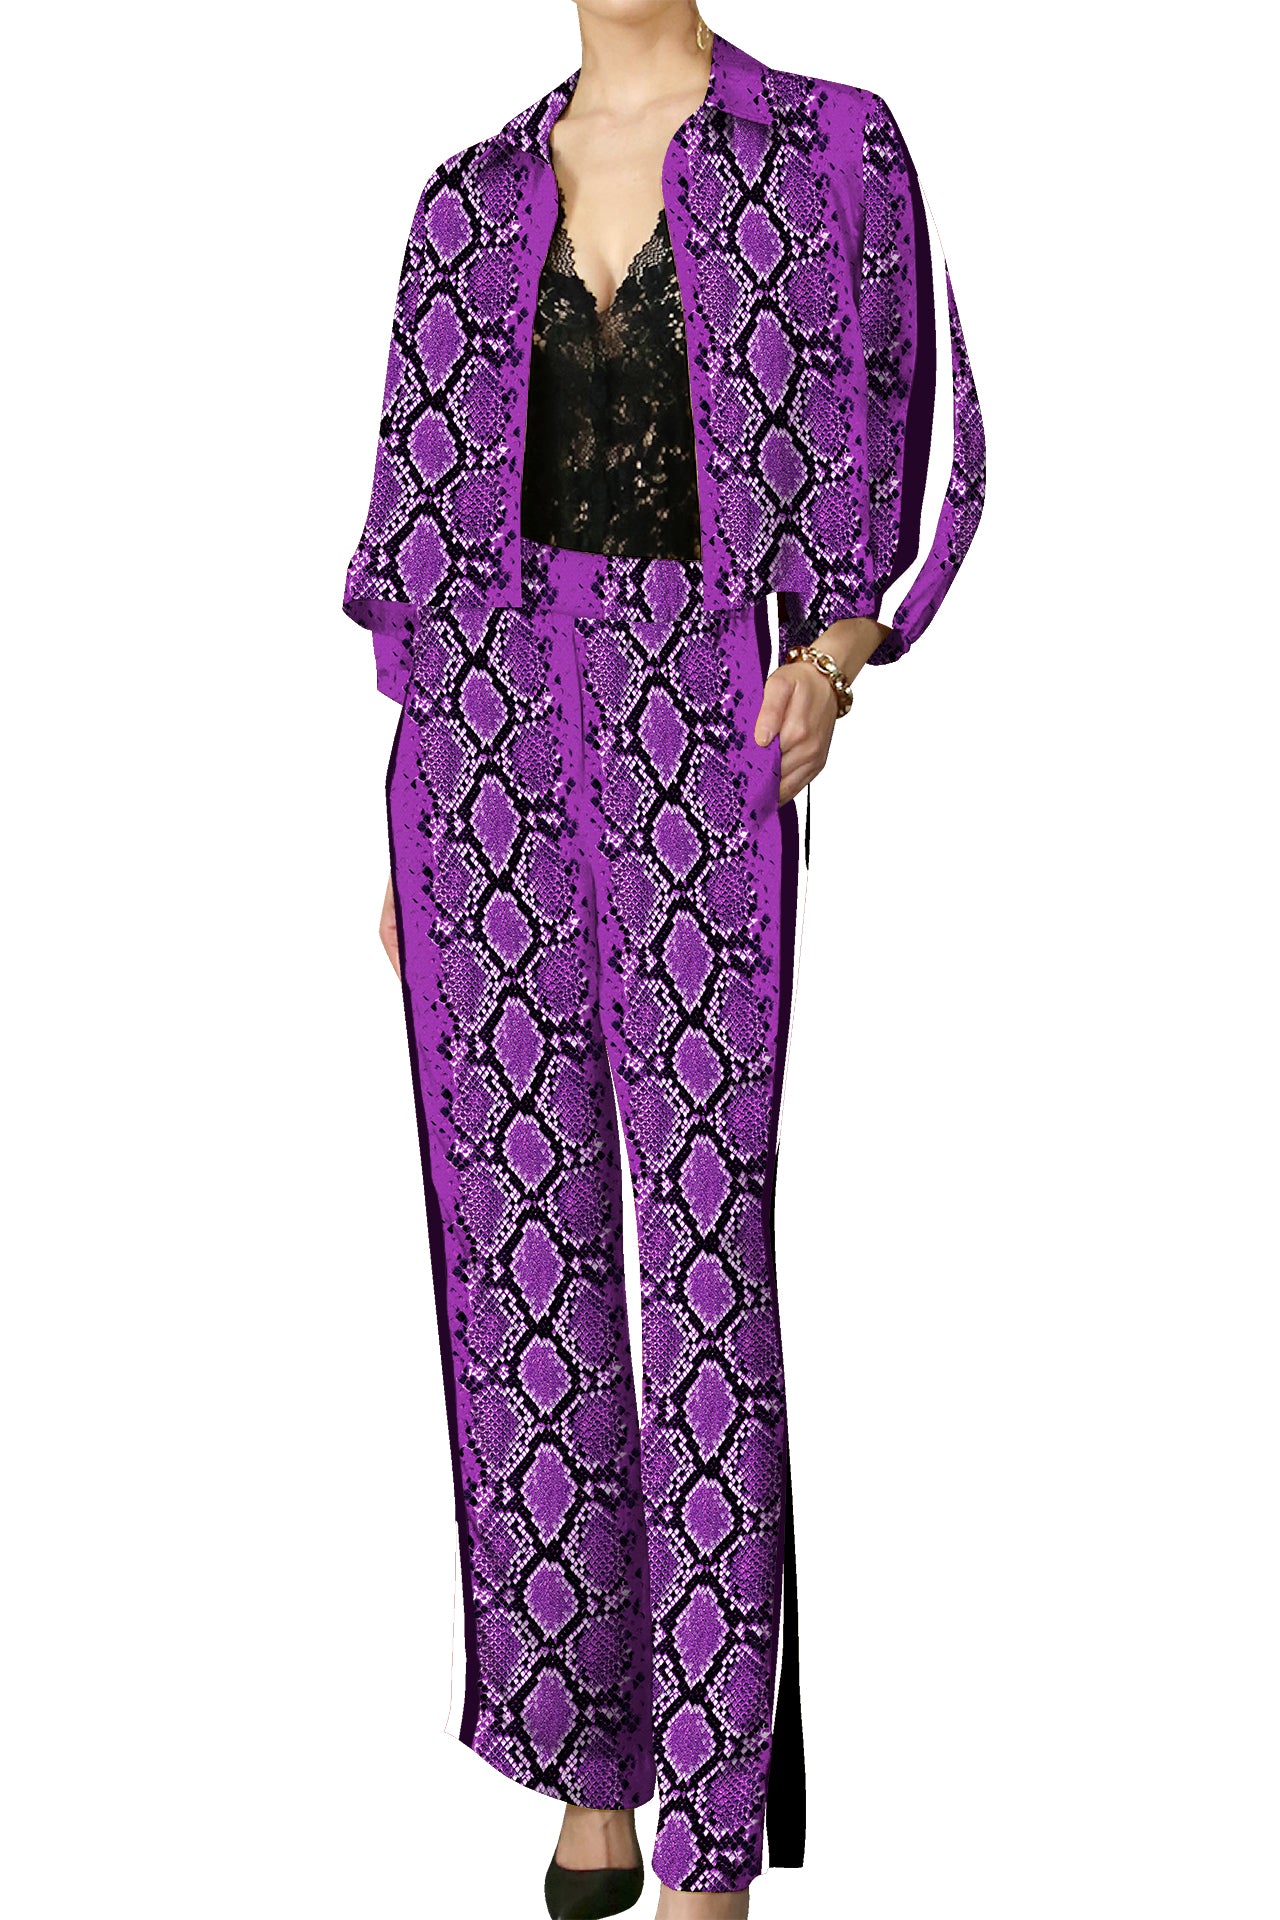 Made with Cupro Biodegradable Fabrics Matching Suit Set in Snake Print